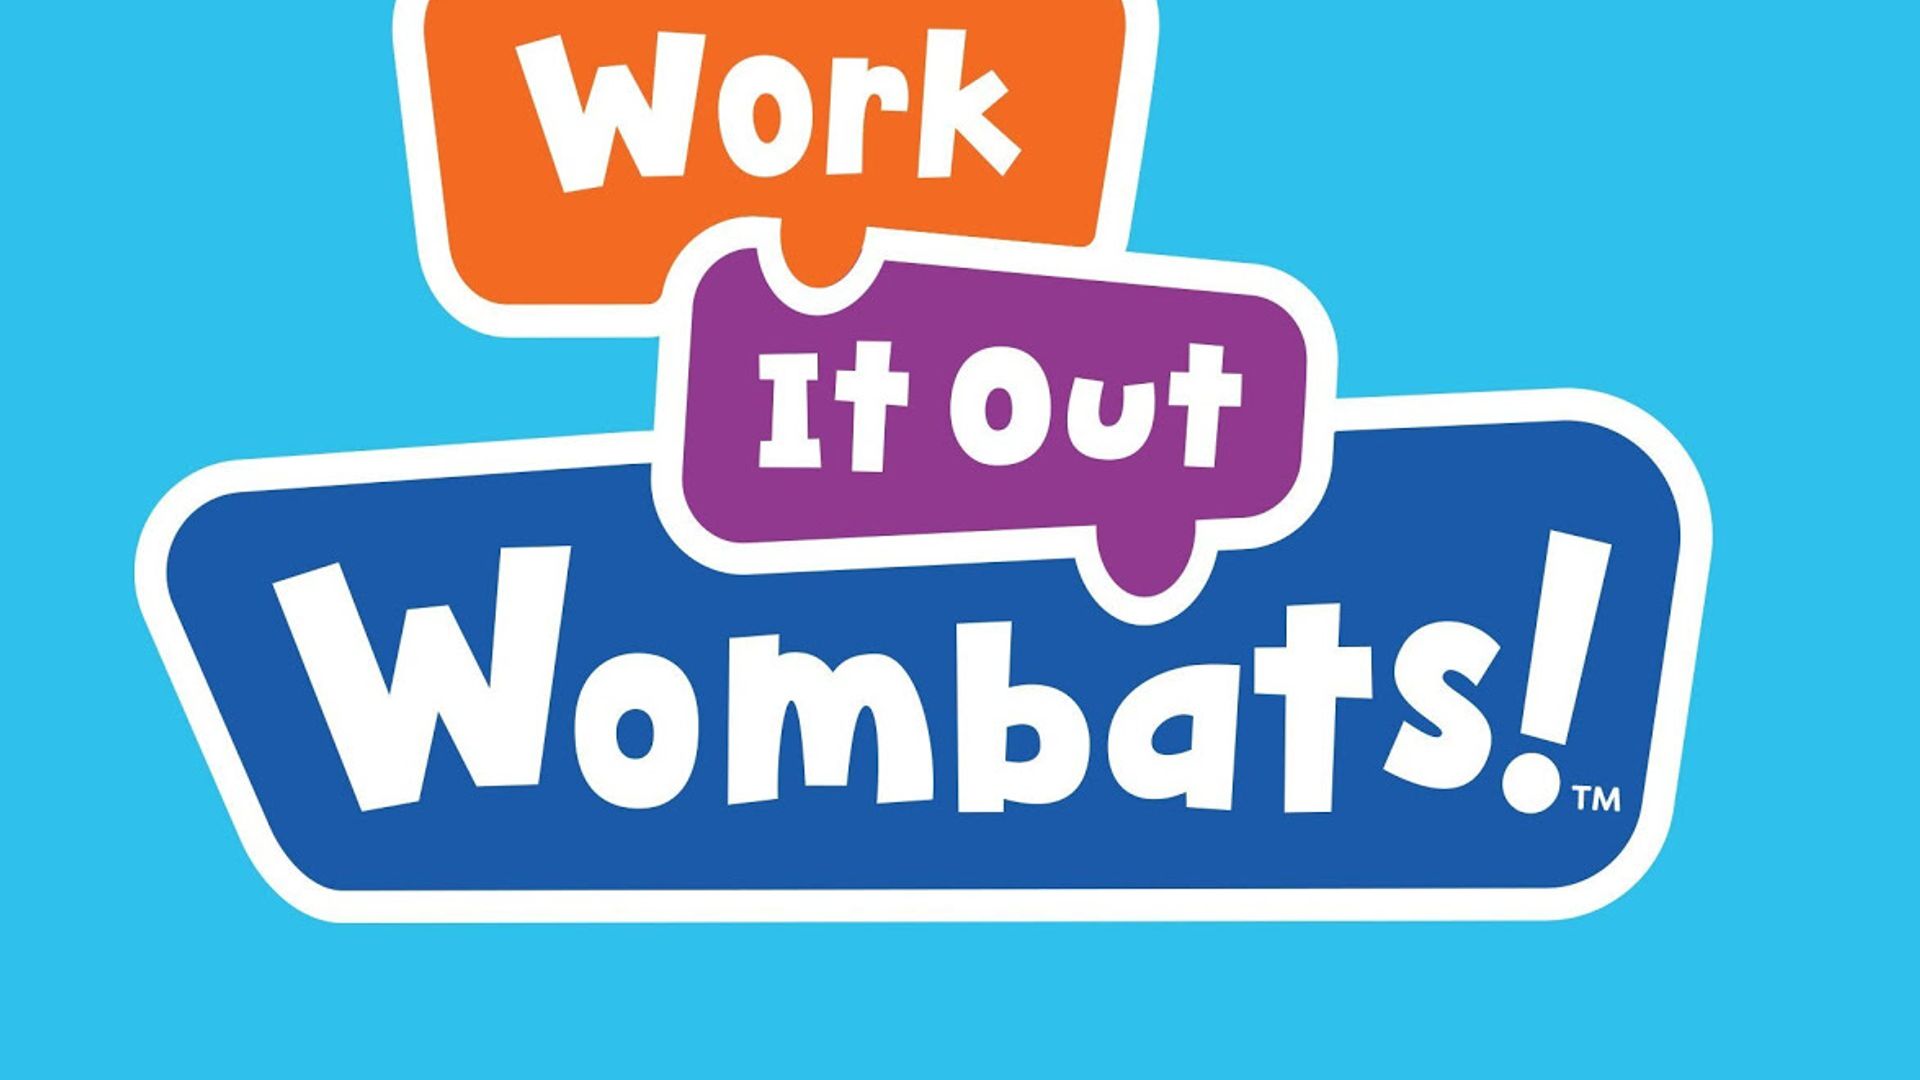 Work It Out Wombats! background